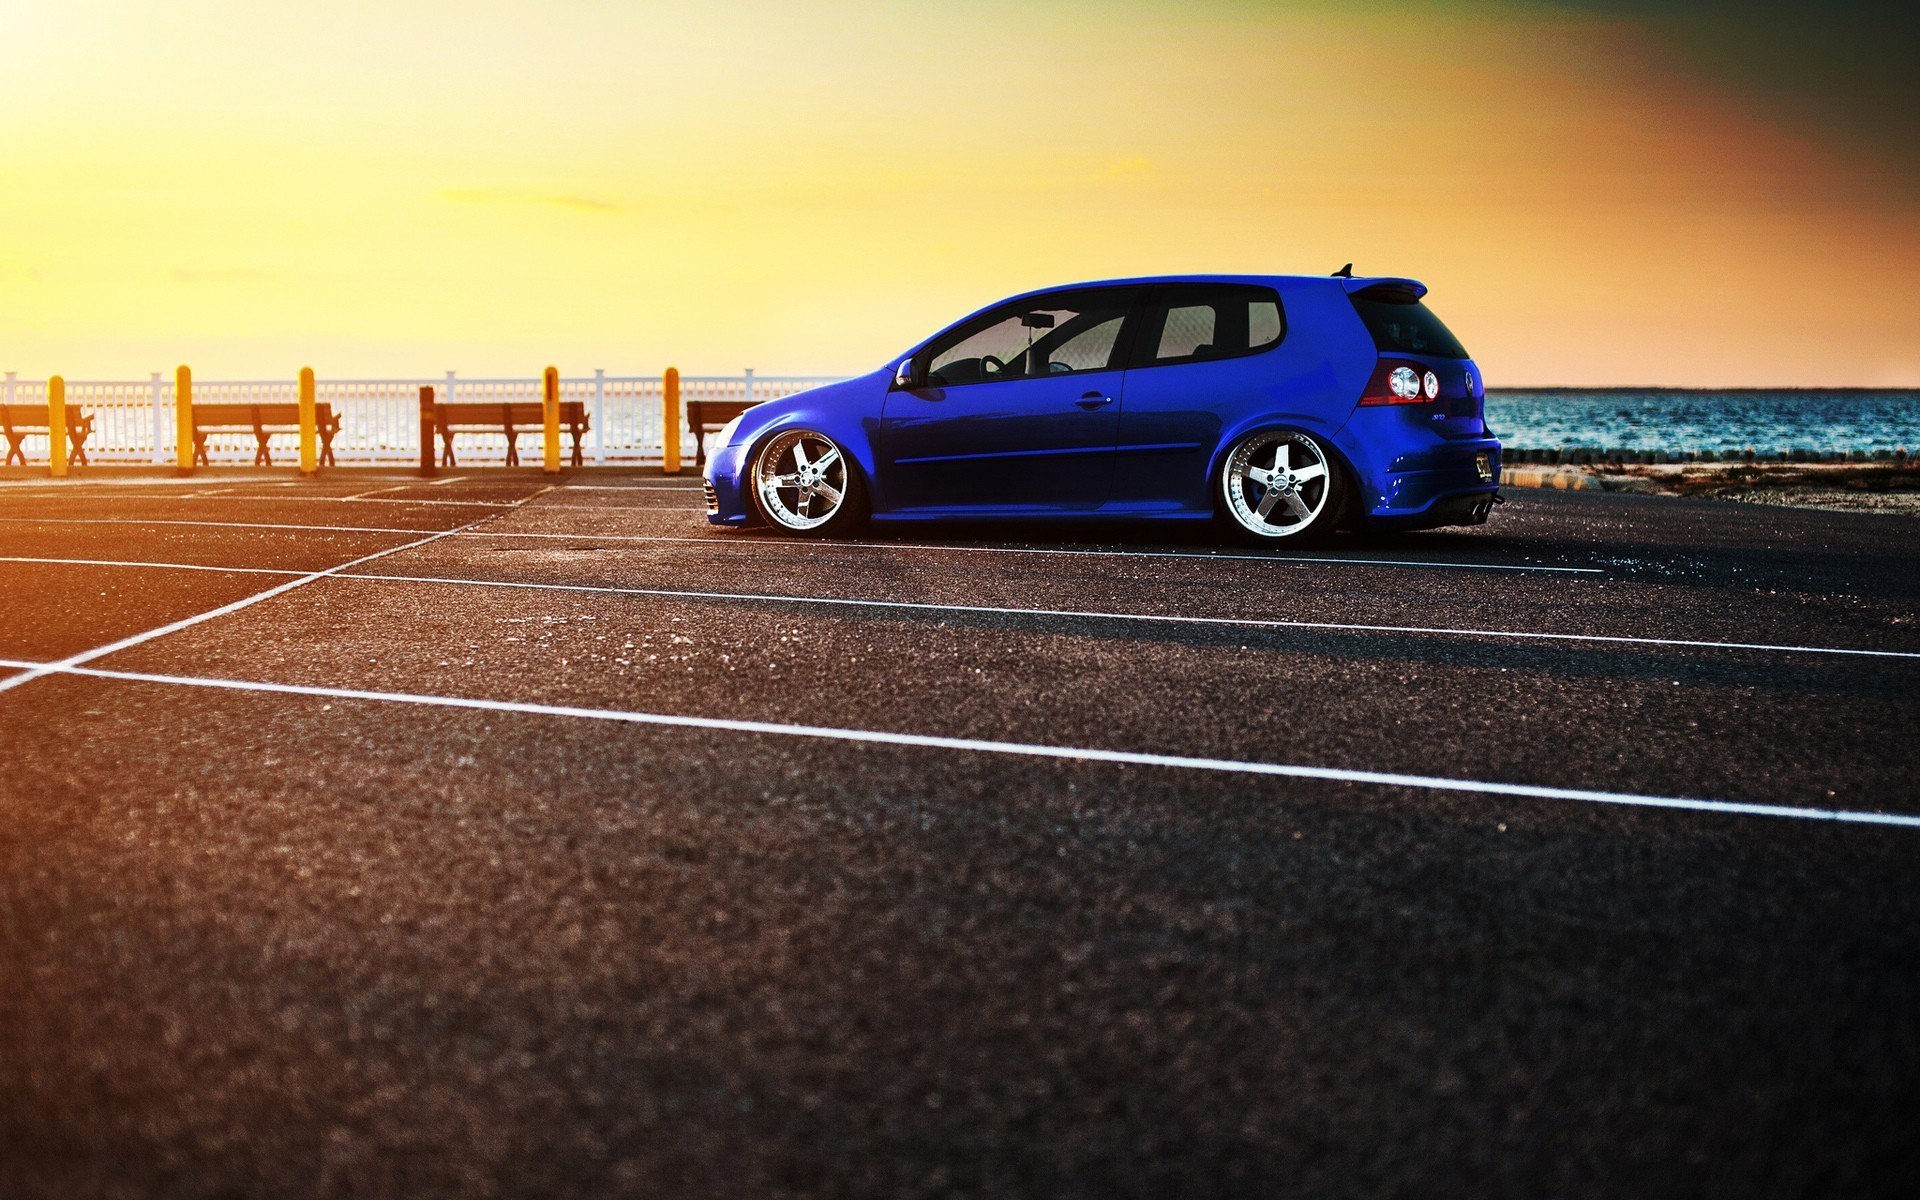 Volkswagen Golf Wallpapers High Quality | Download Free